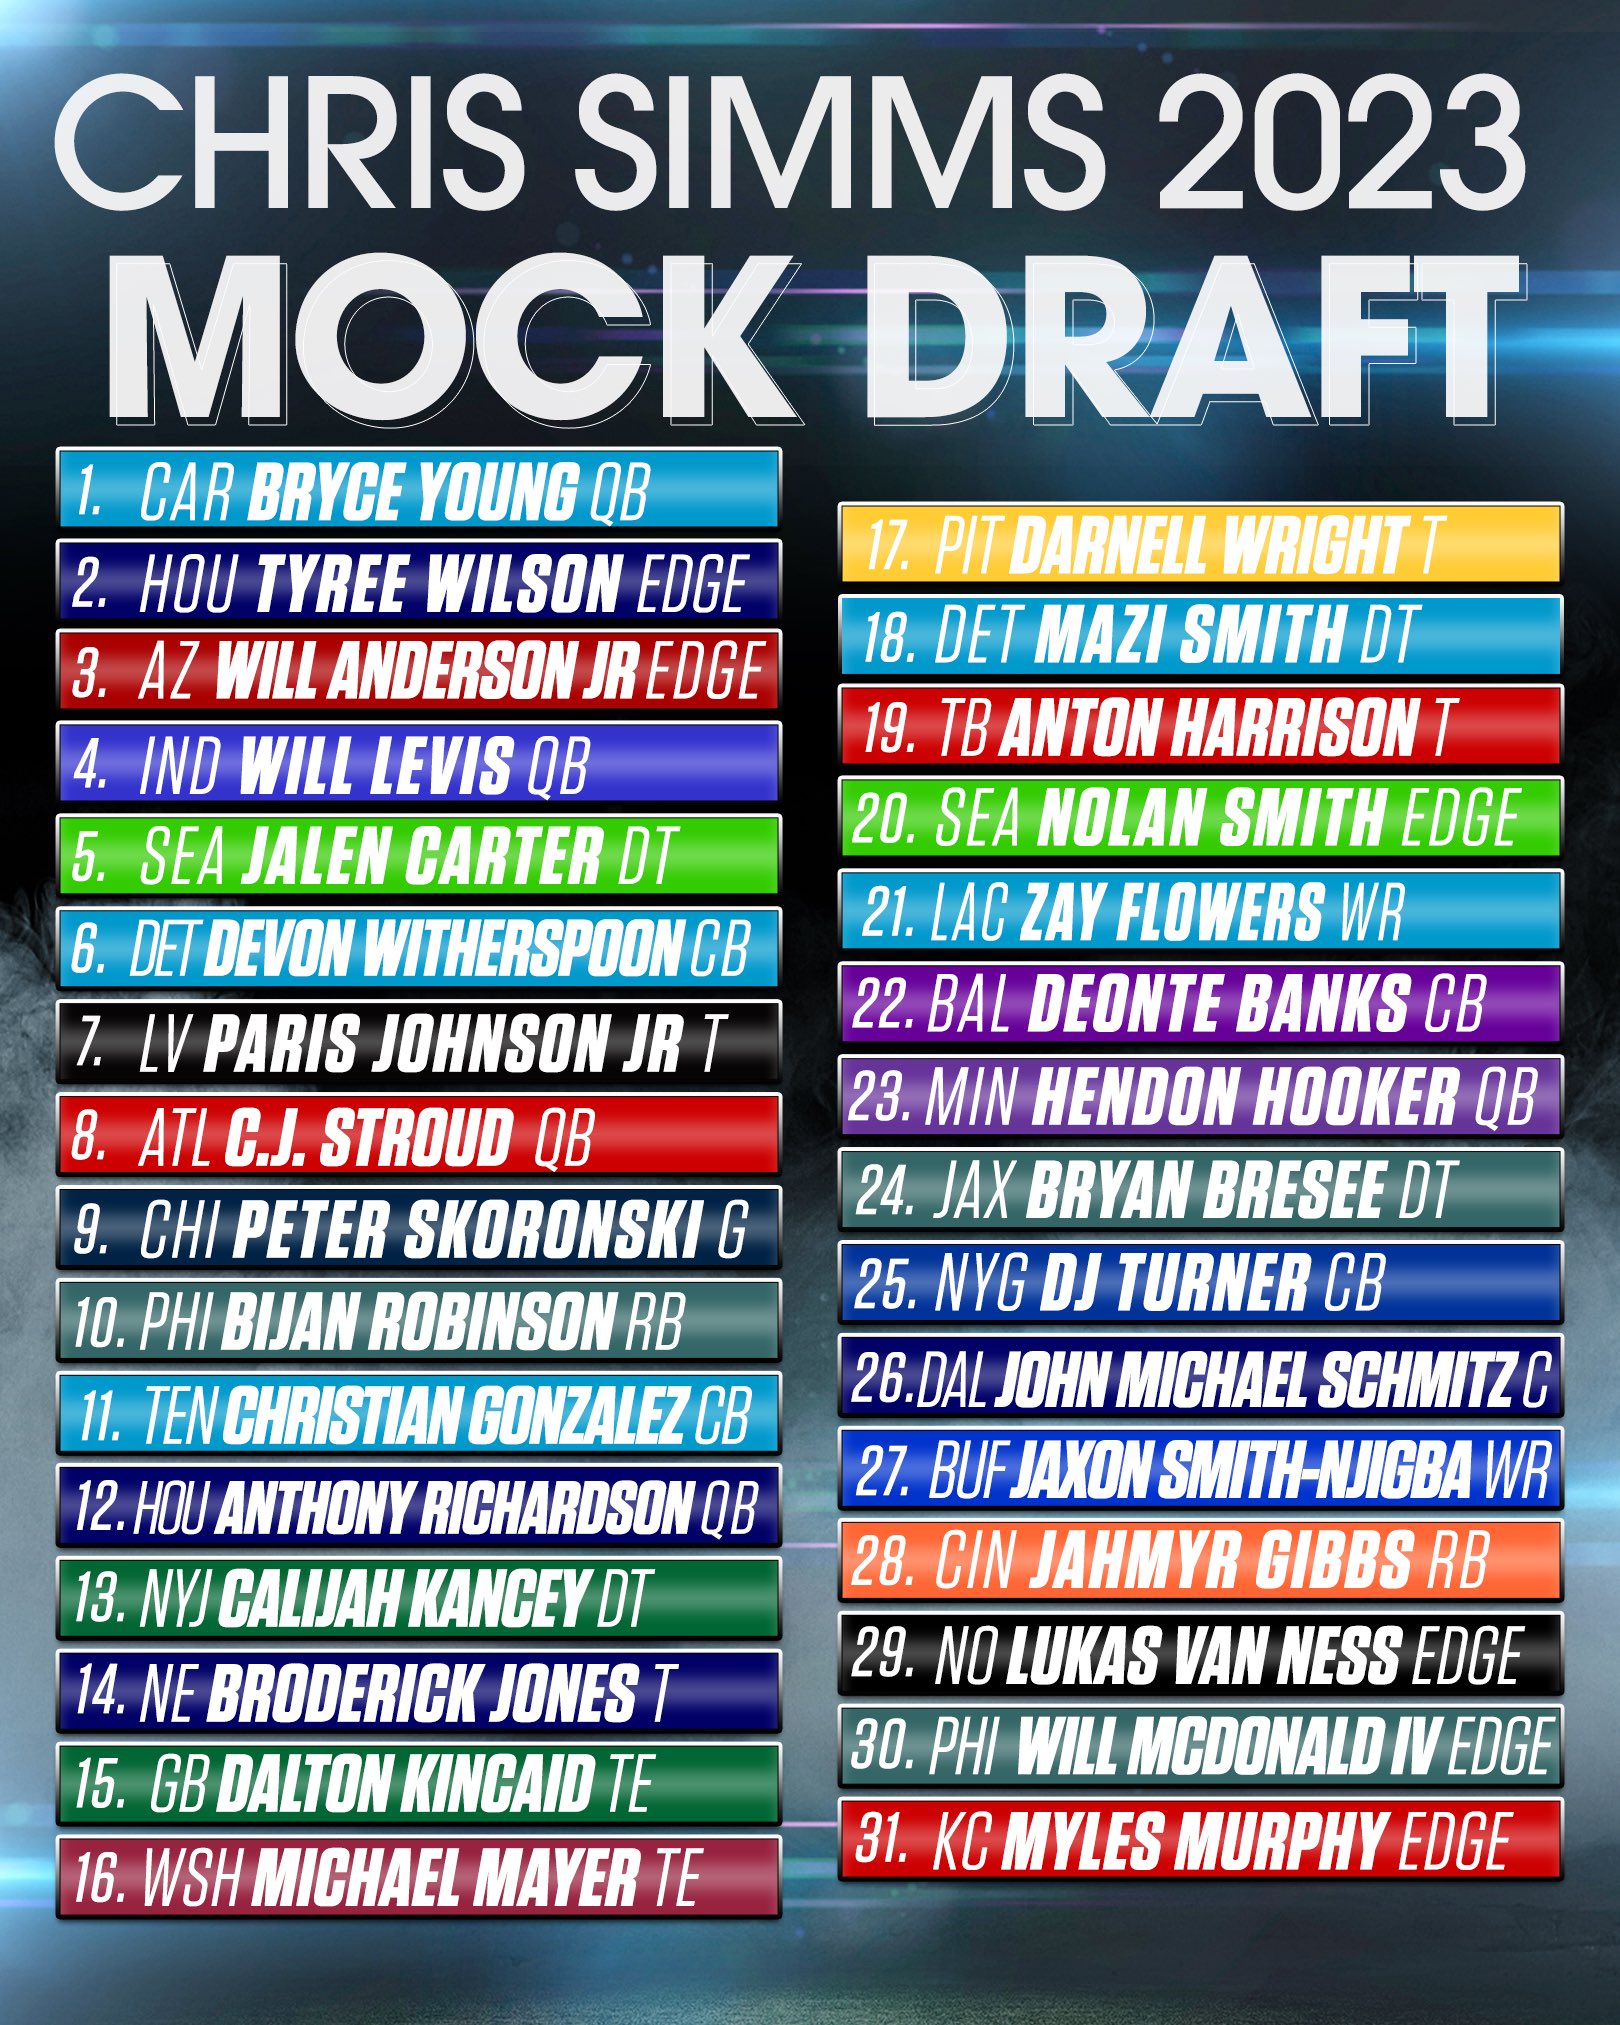 packers mock draft 2023 7 rounds